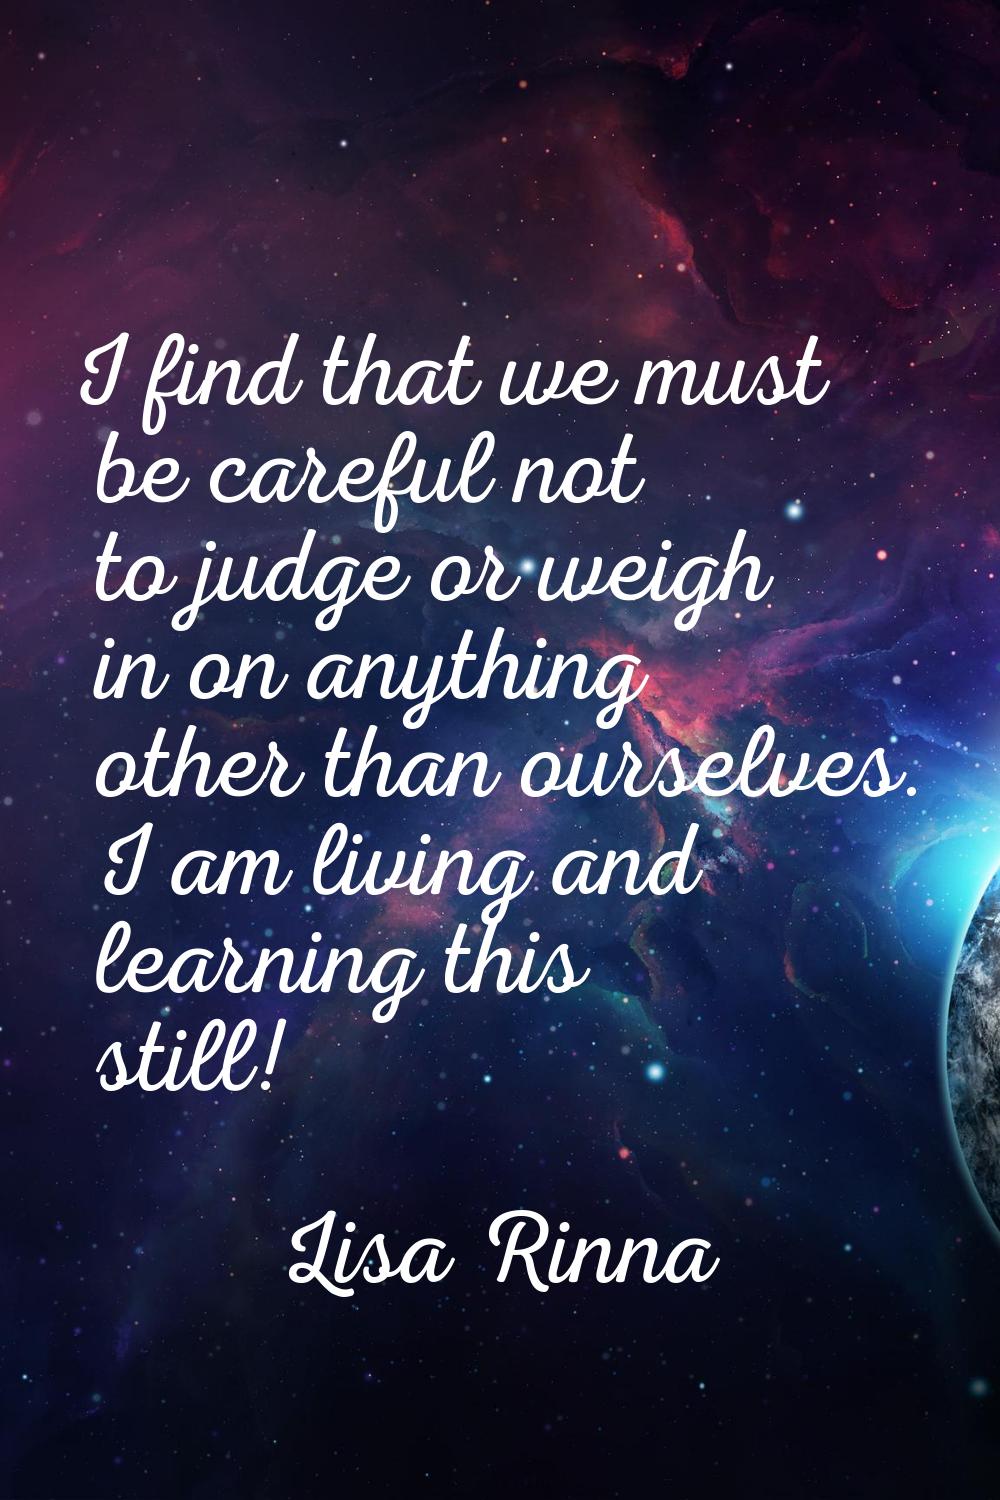 I find that we must be careful not to judge or weigh in on anything other than ourselves. I am livi